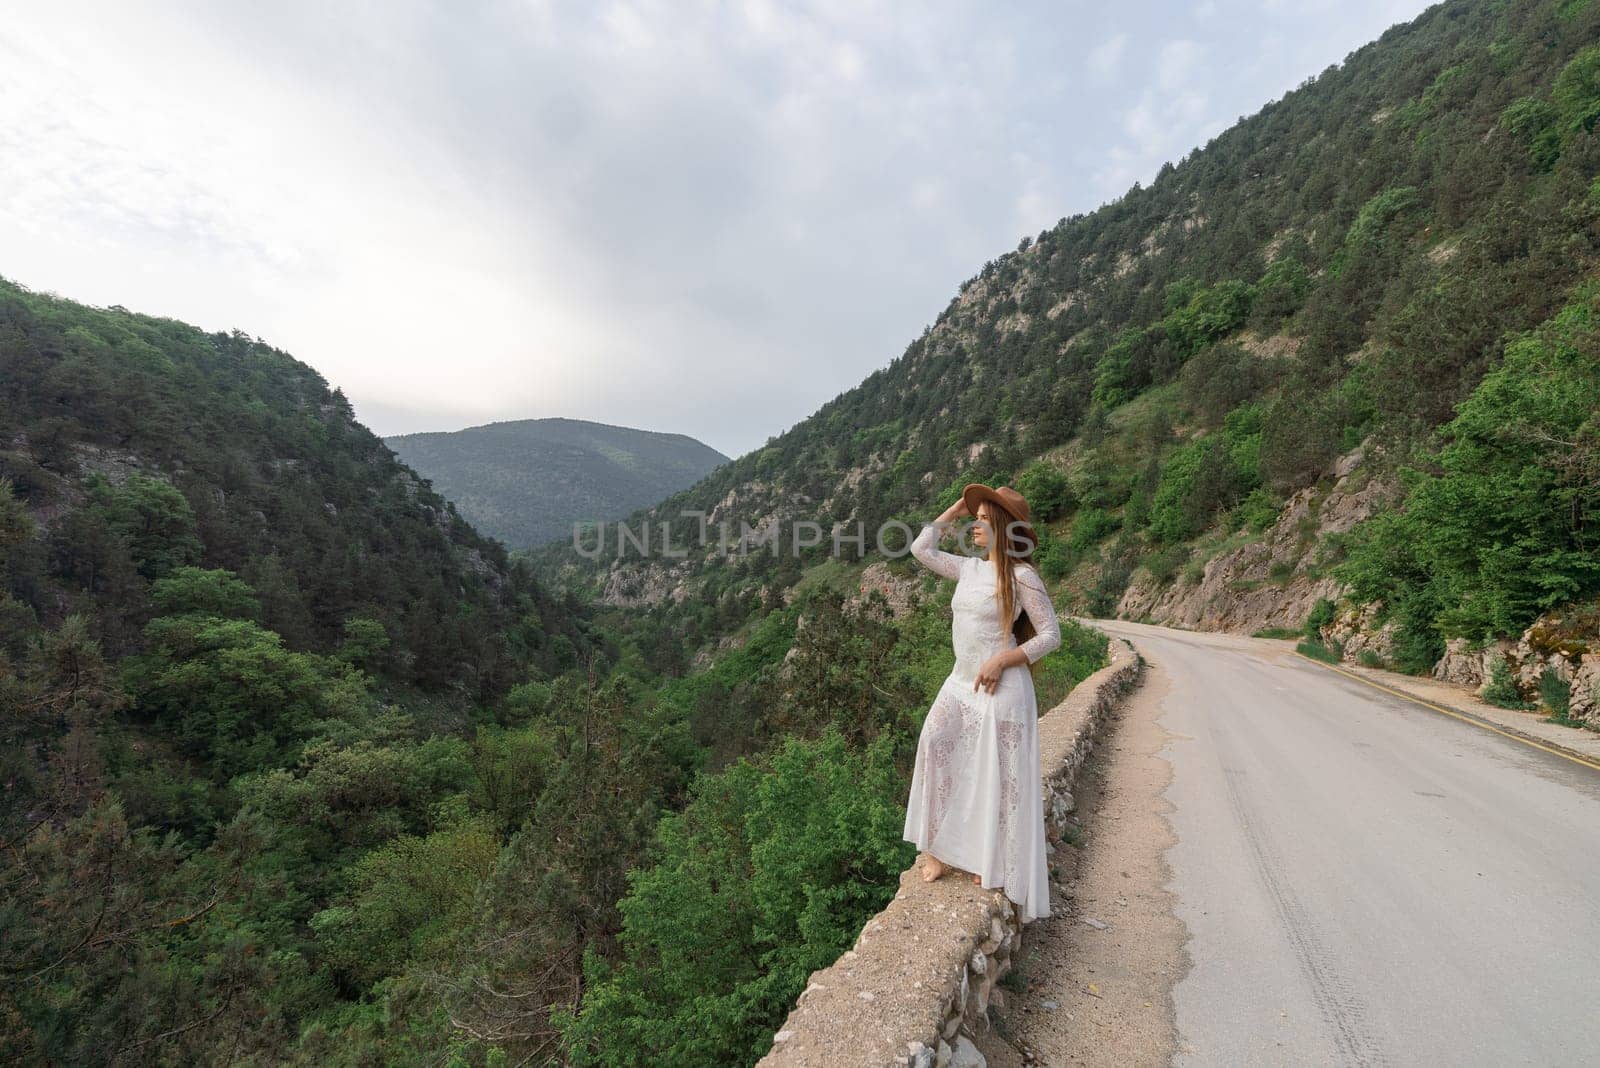 A woman in a white dress stands on a road overlooking a mountain range. The scene is serene and peaceful, with the woman's hat adding a touch of whimsy to the landscape